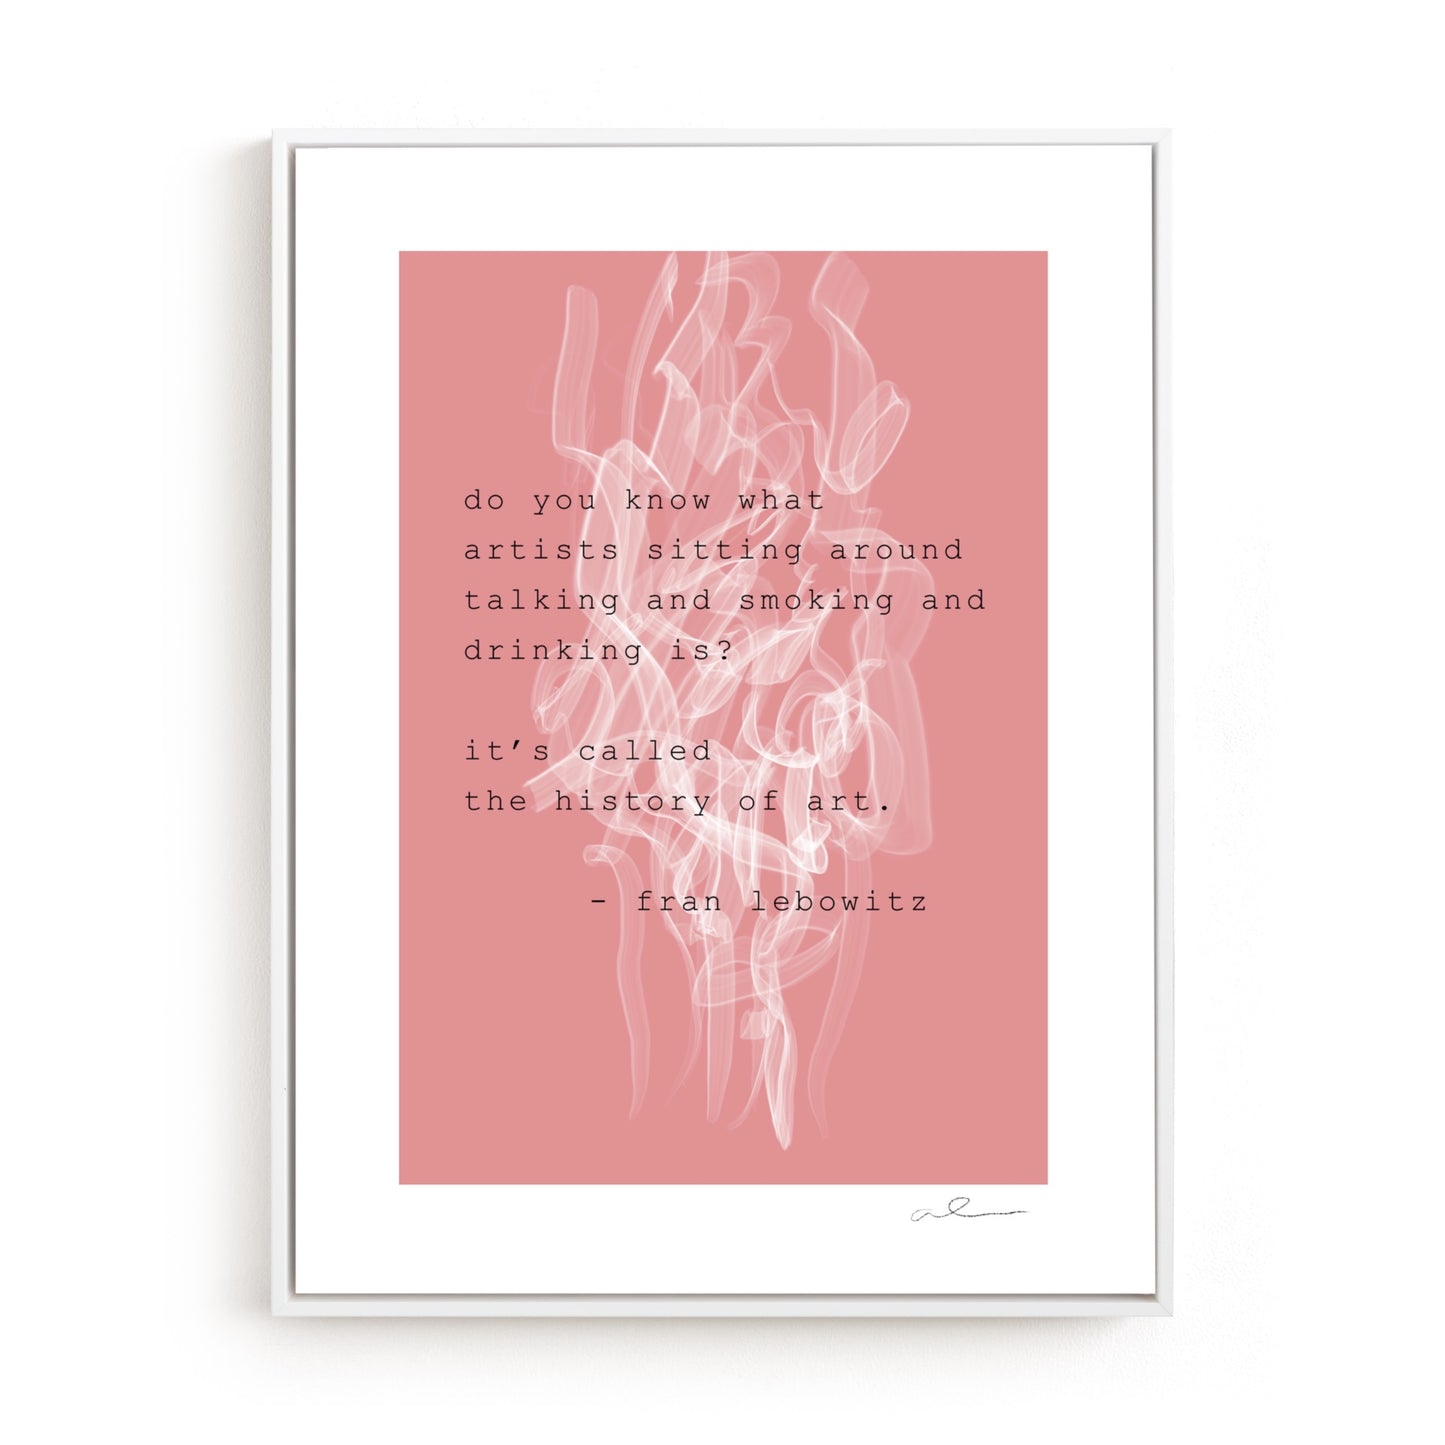 Smoke Screen with Fran Lebowitz quote